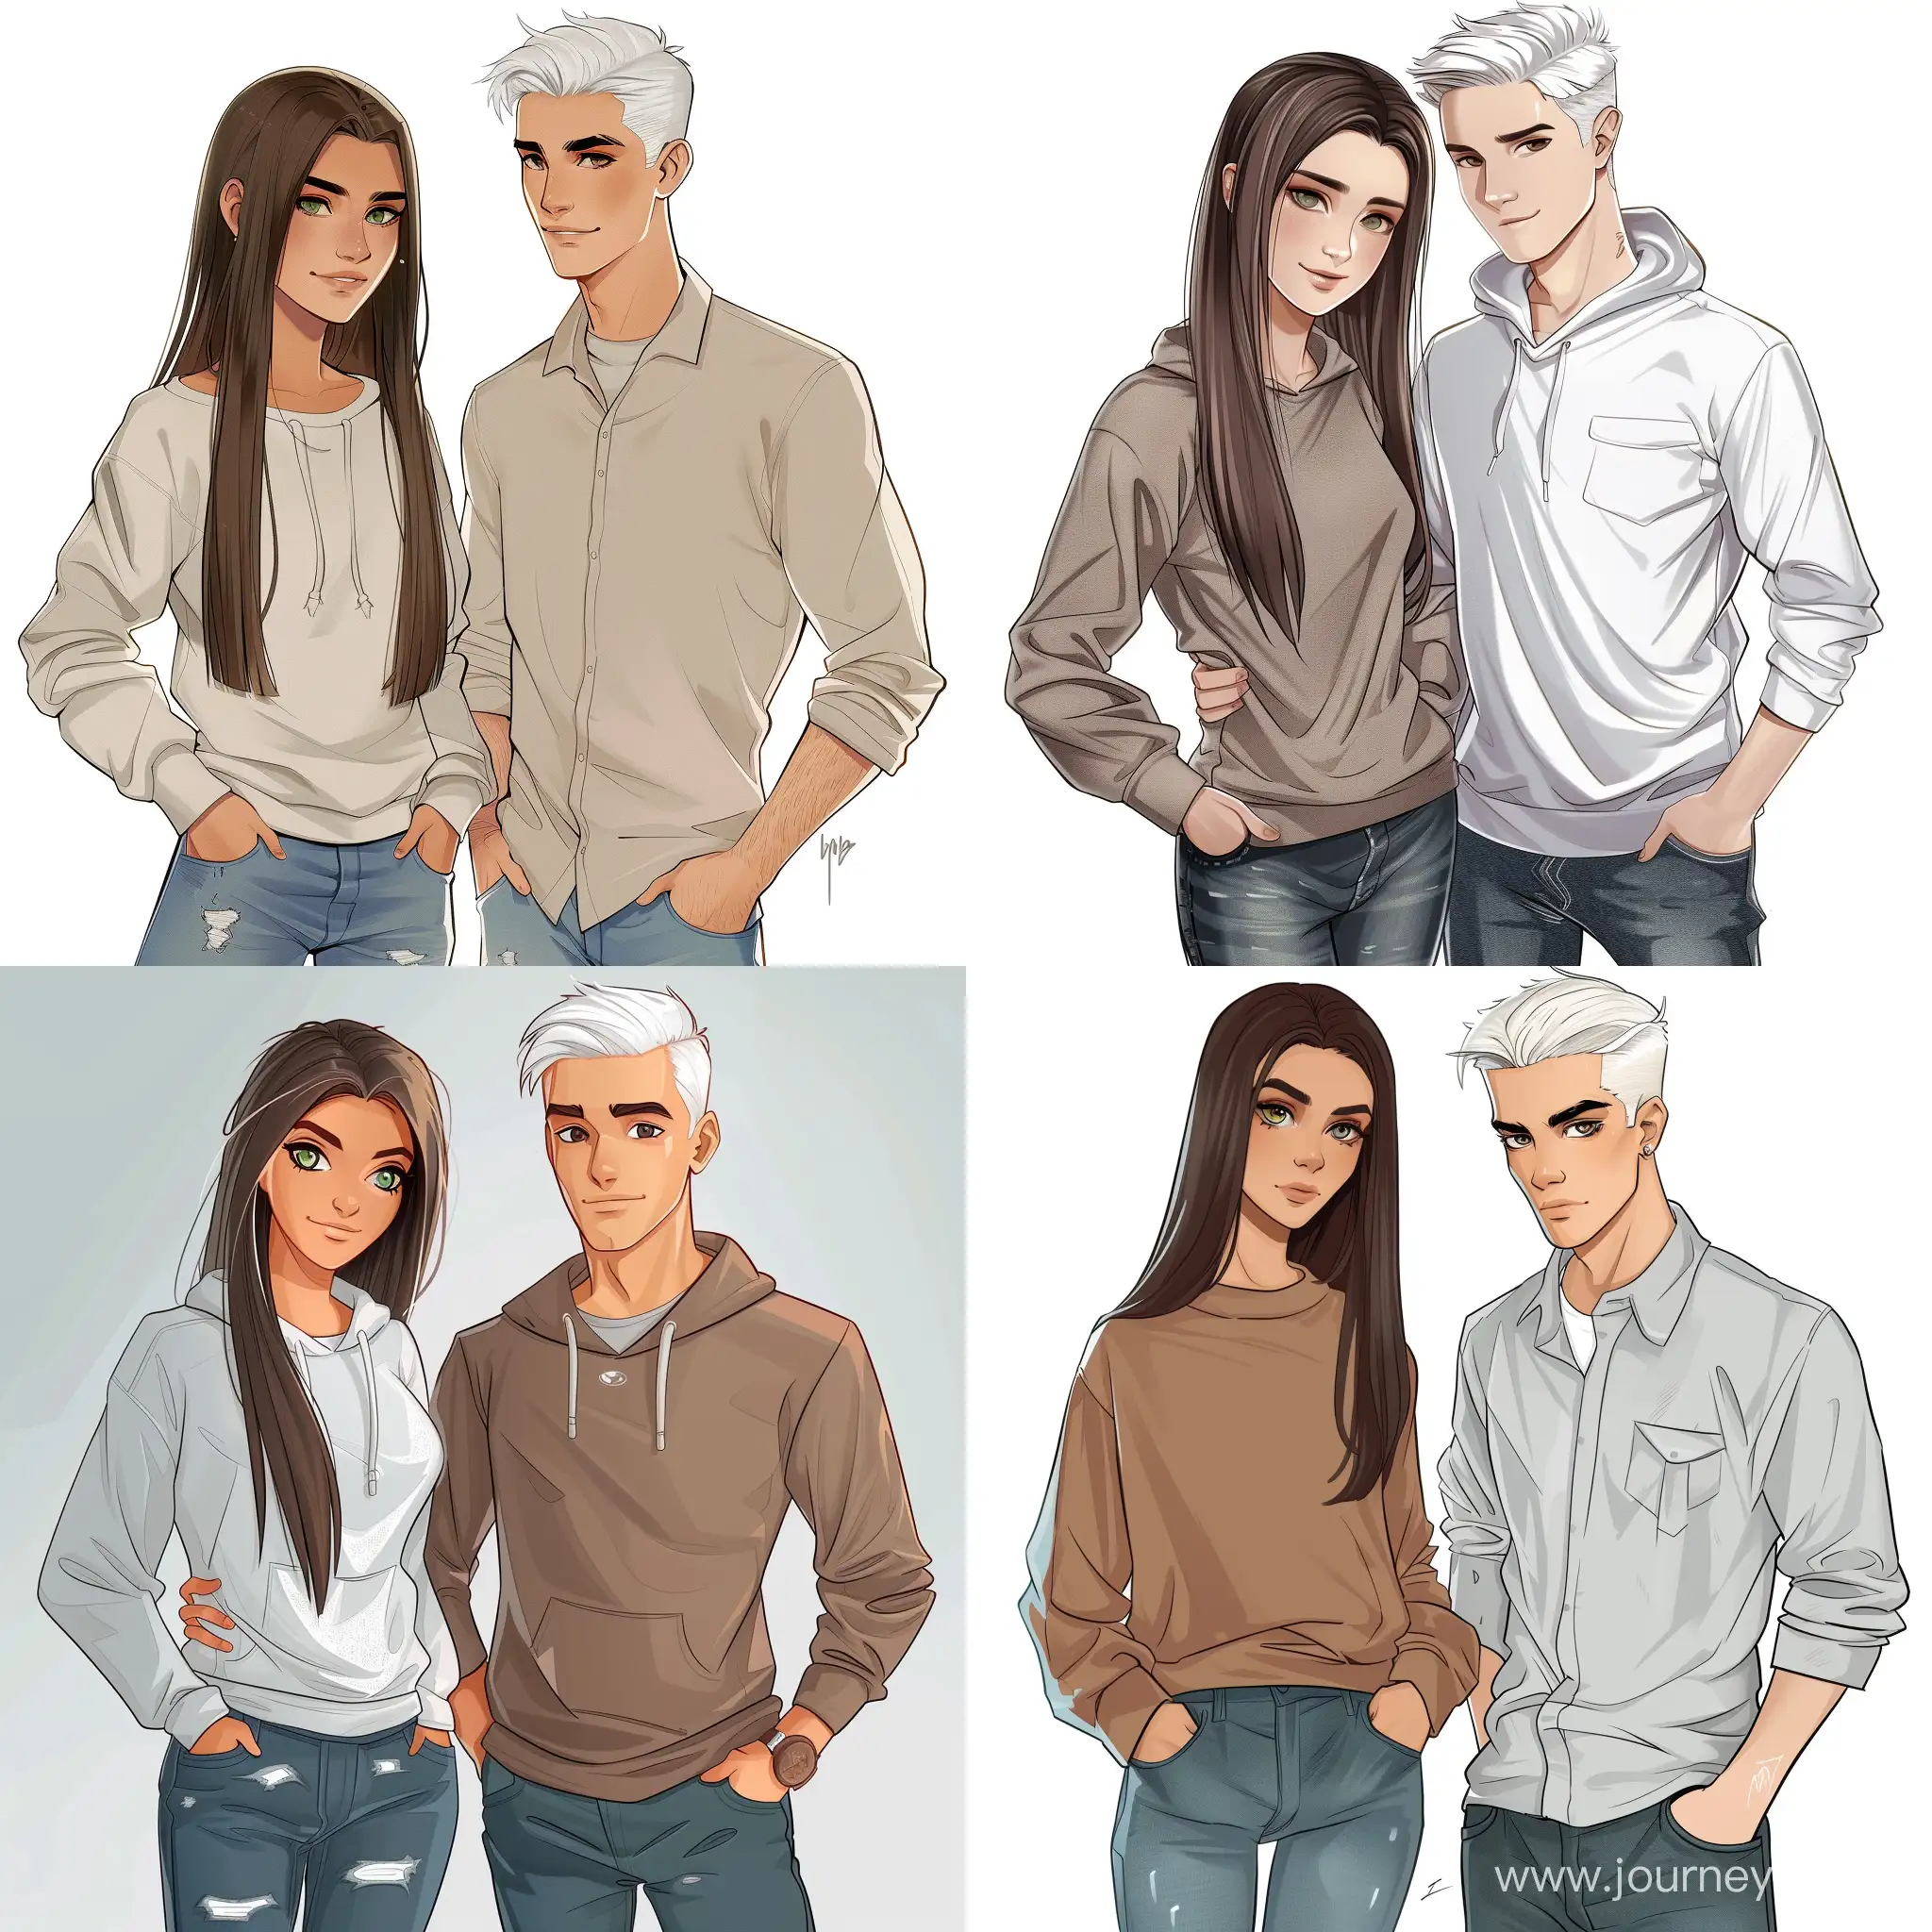 Teenage-Couple-in-Casual-Attire-Handsome-Guy-and-Beautiful-Girl-Cartoon-Art